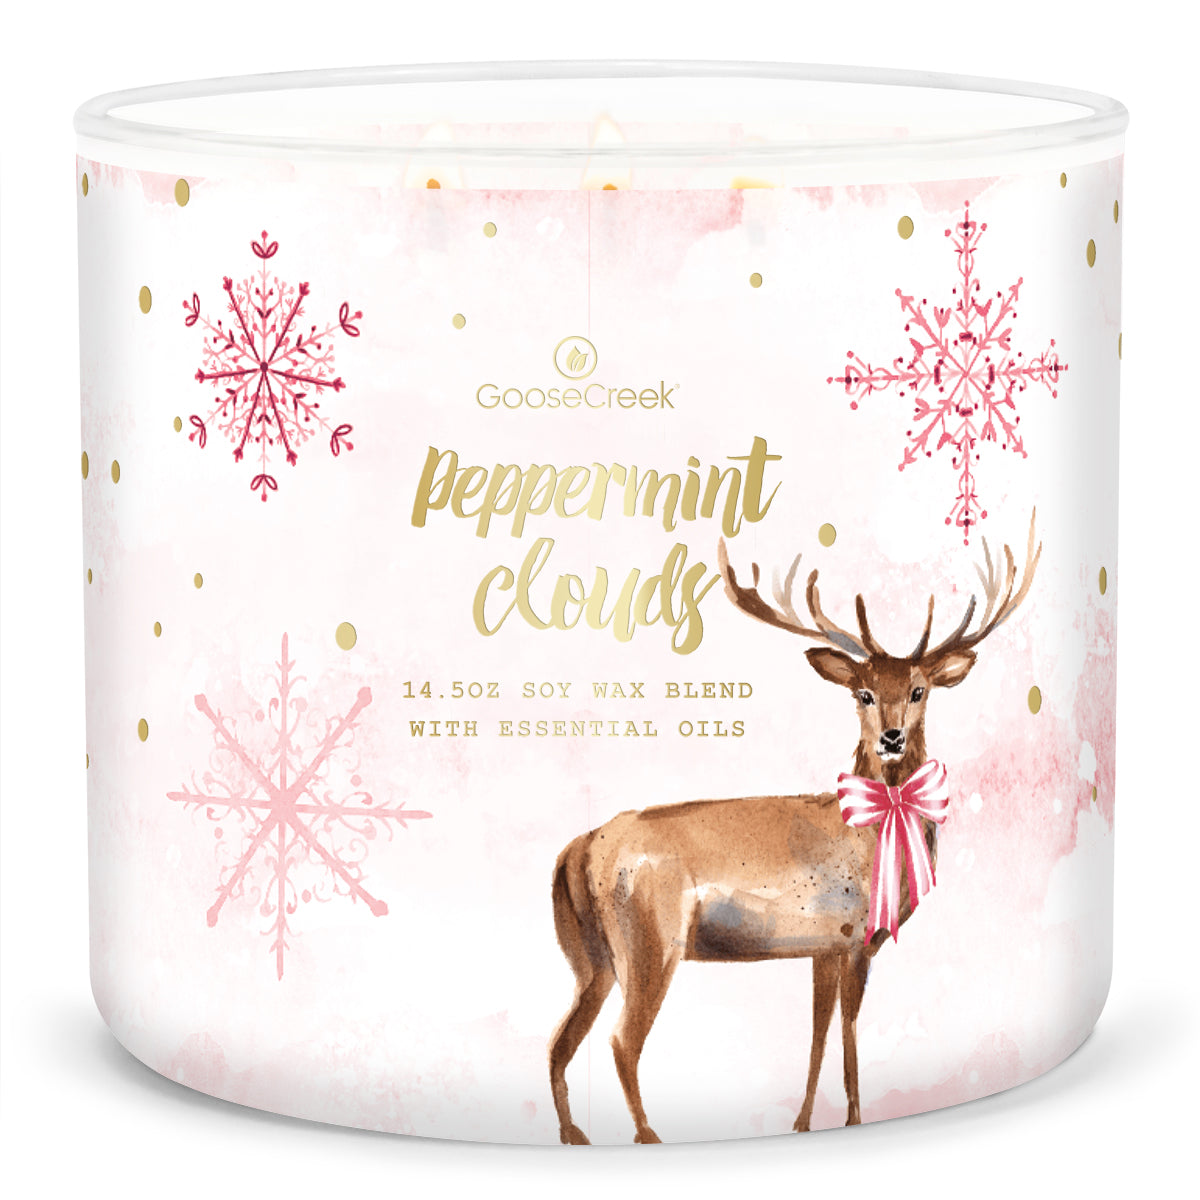 NEW Goose Creek Candle Cotton Candy 14.5 oz 3 Wick Candle * Soy Wax